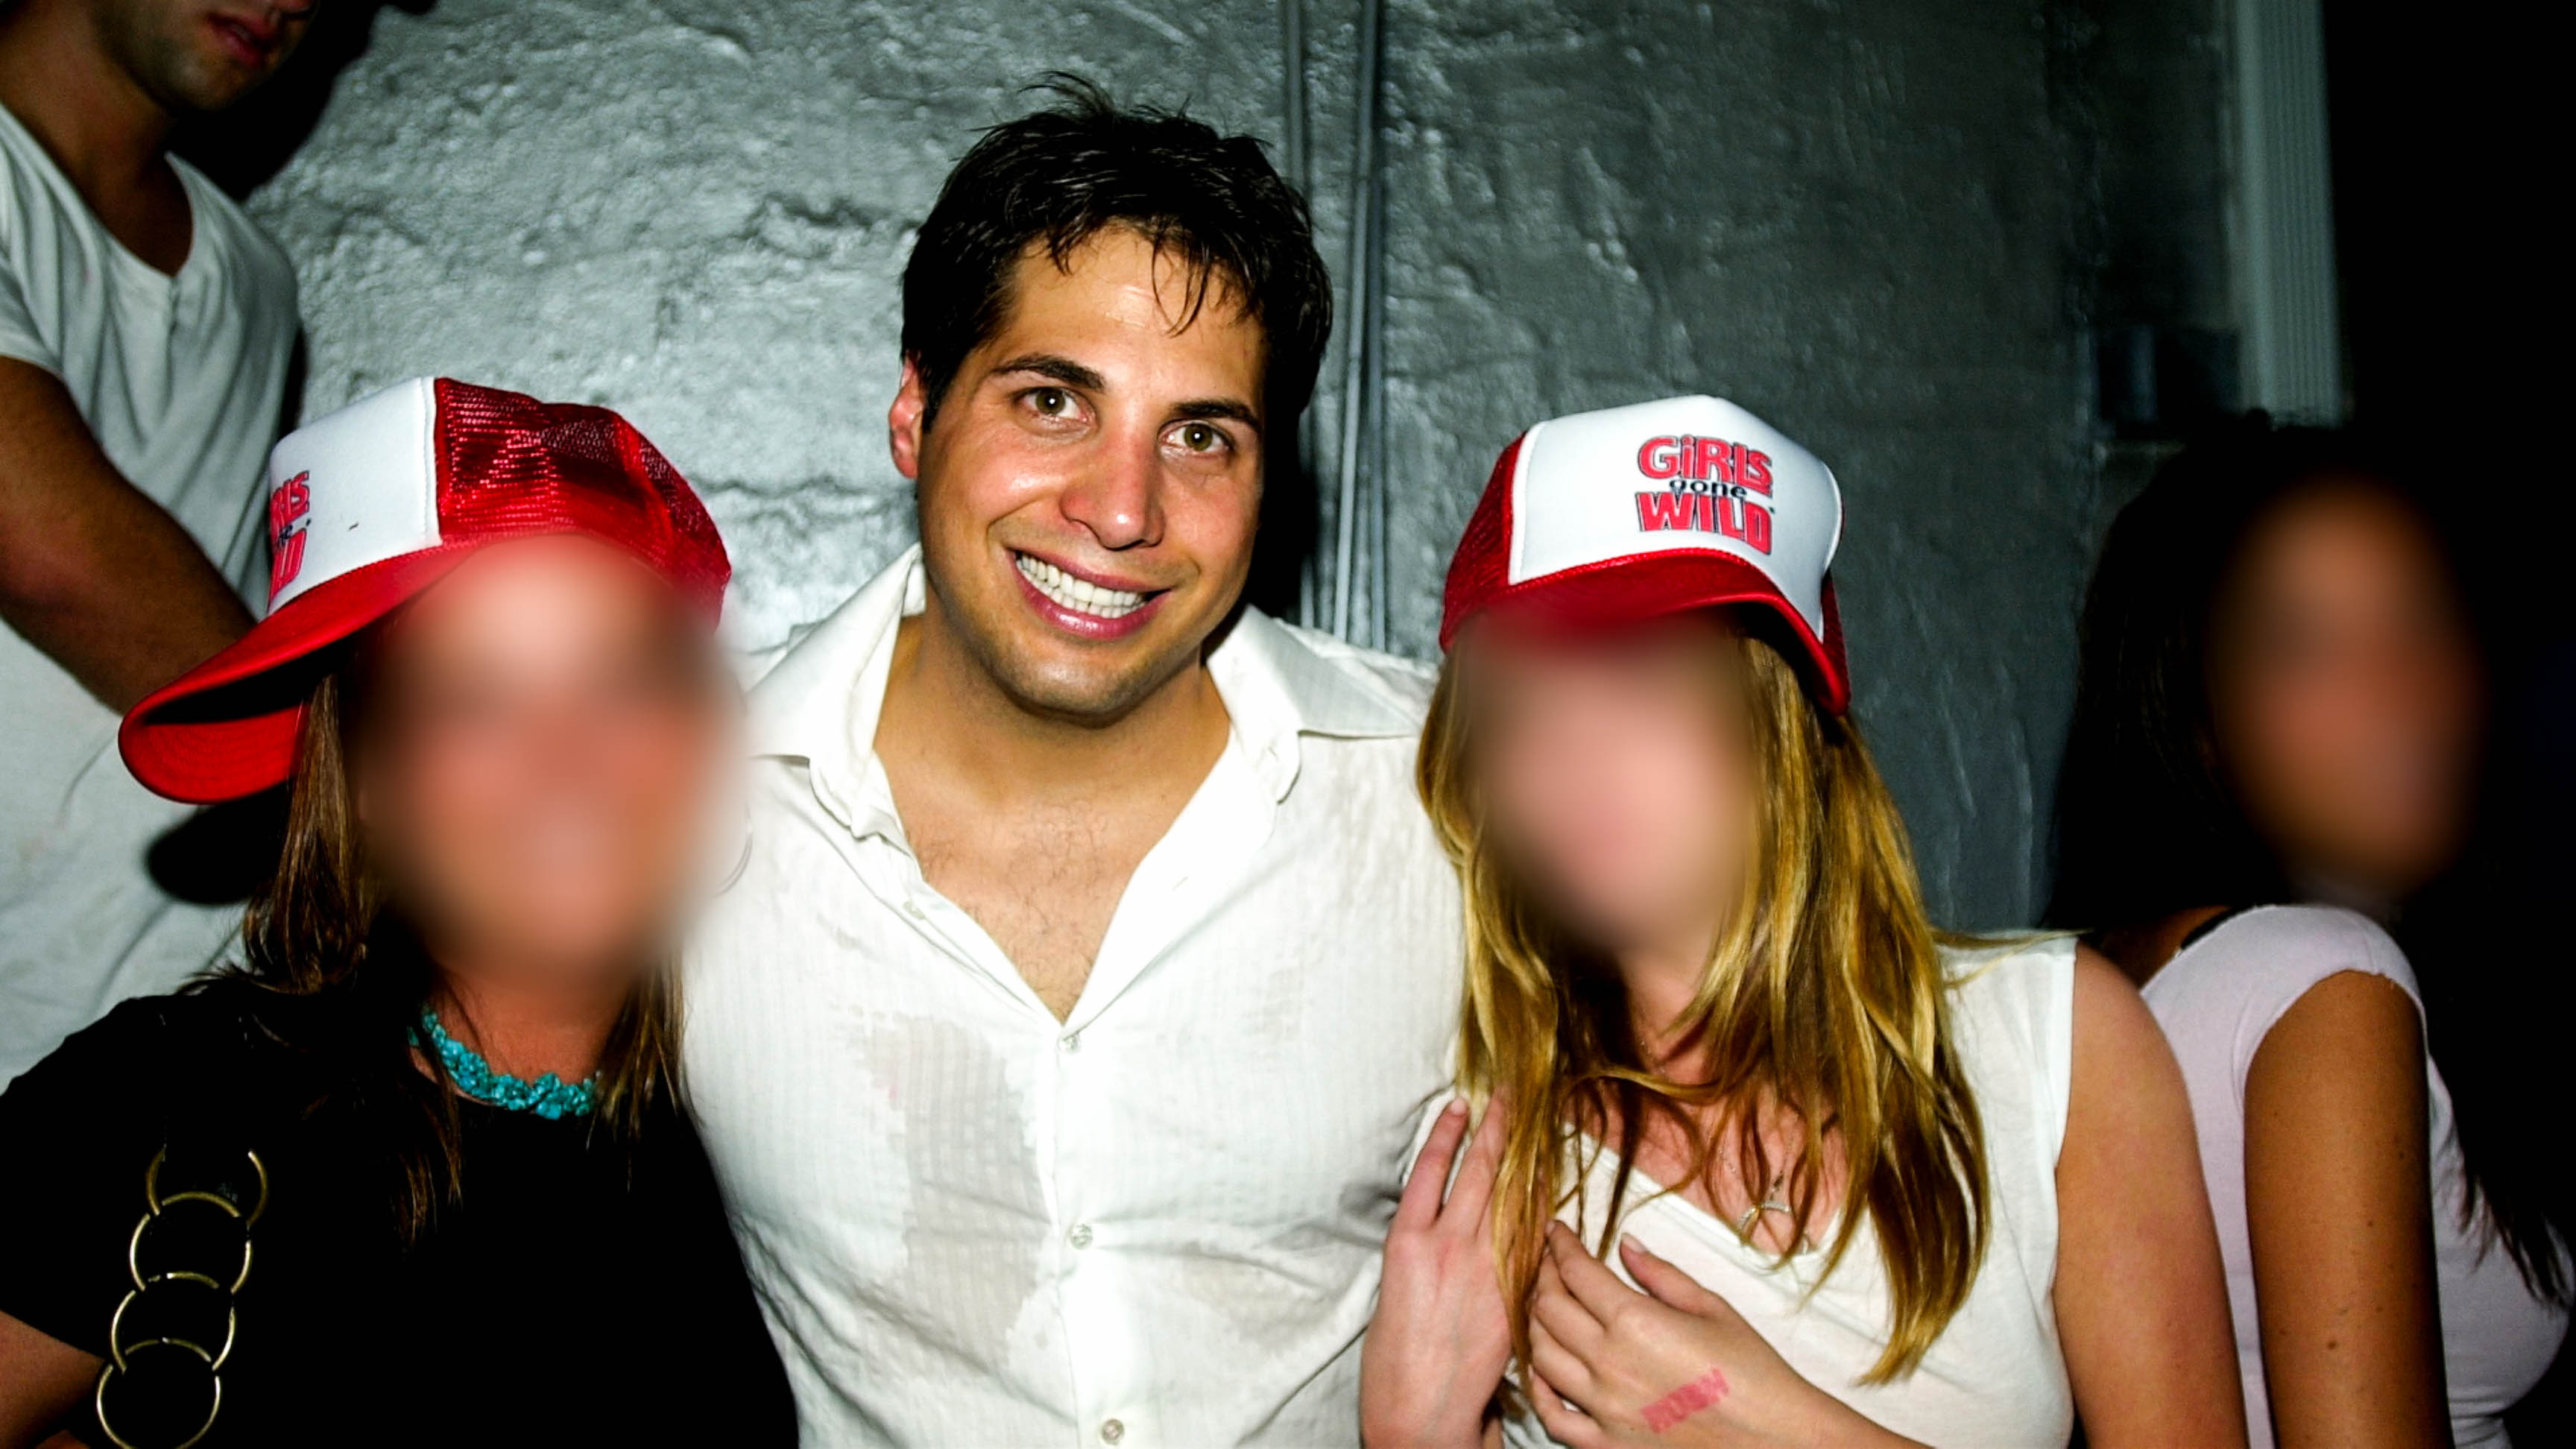 The rise and fall of Joe Francis and Girls Gone Wild